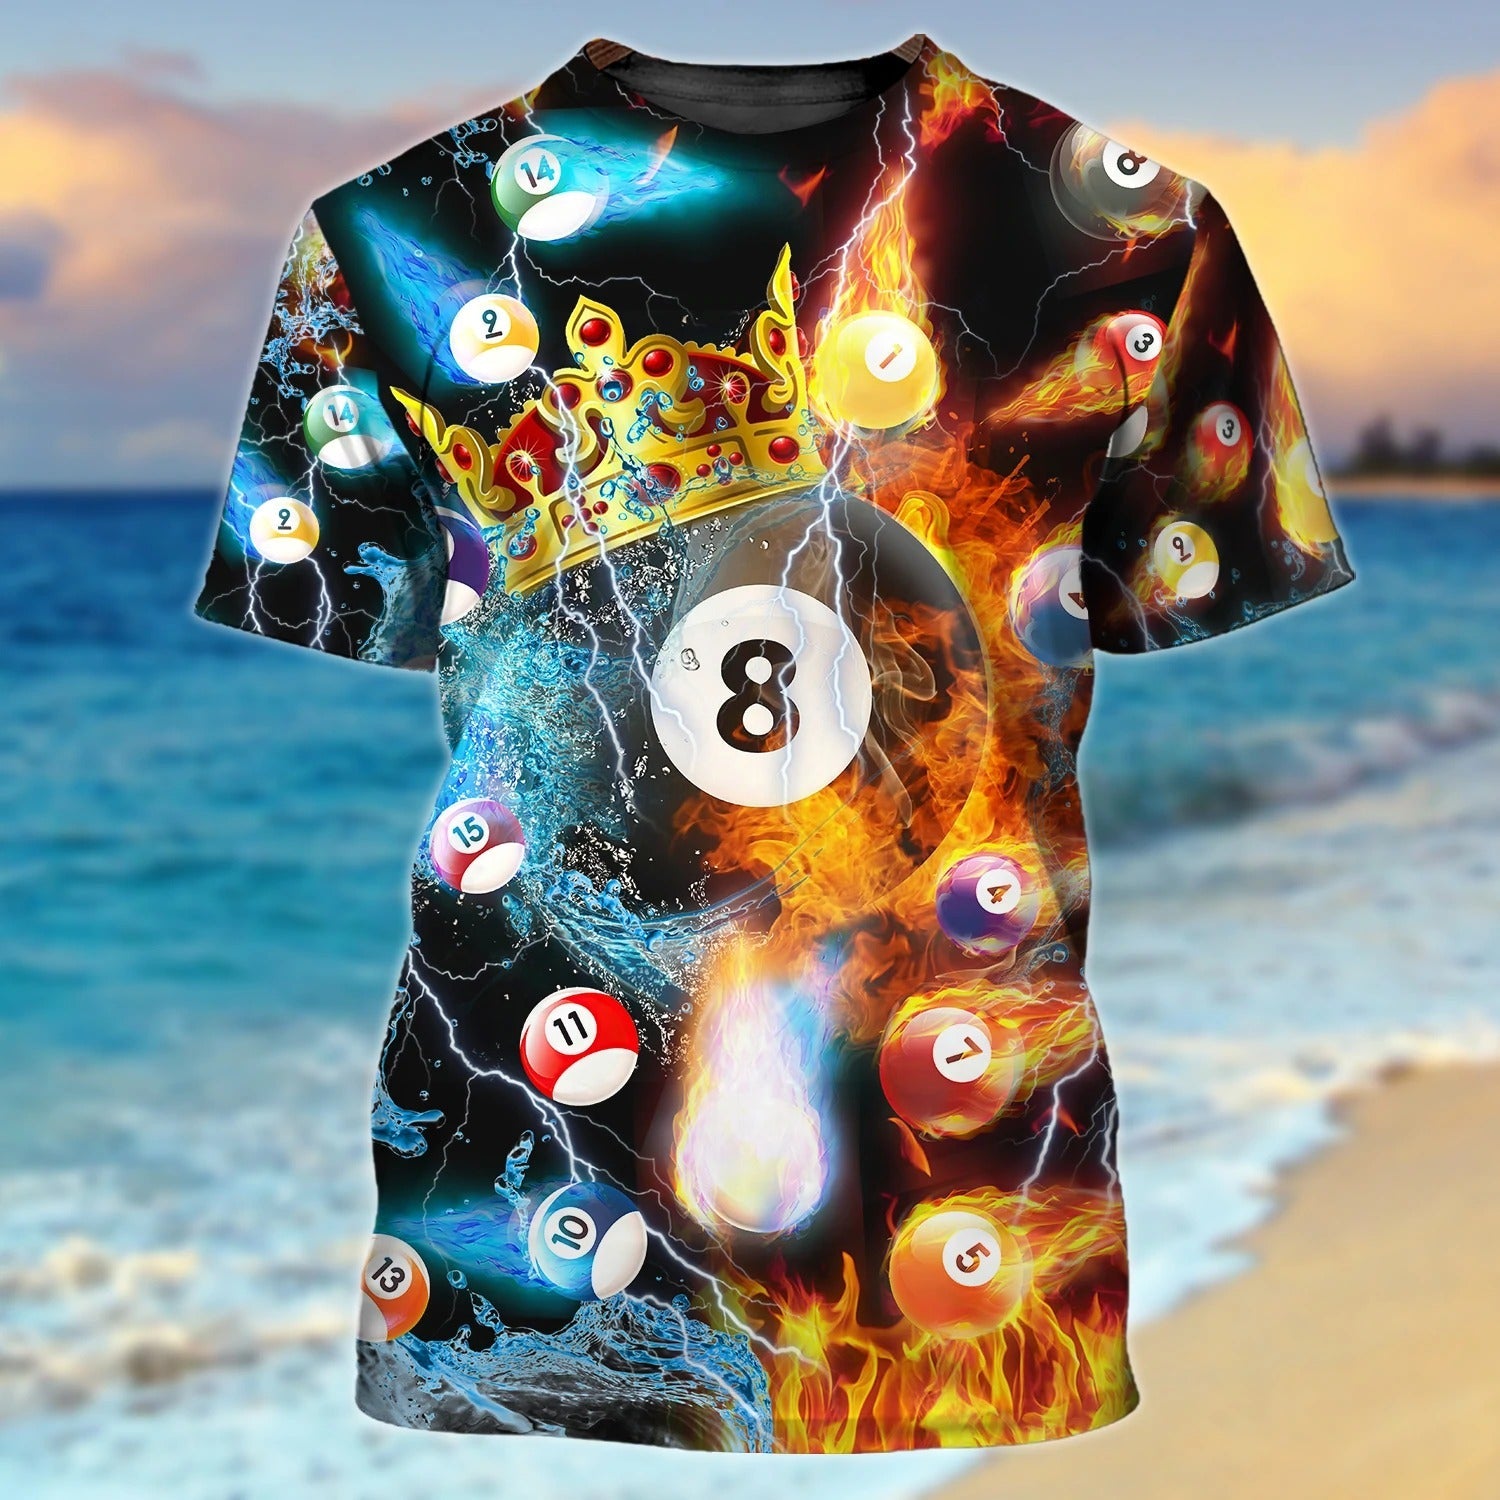 Personalized 3D All Over Print Billiard Shirt For Men/ Gift For Billiard Player/ Billiard Shirts